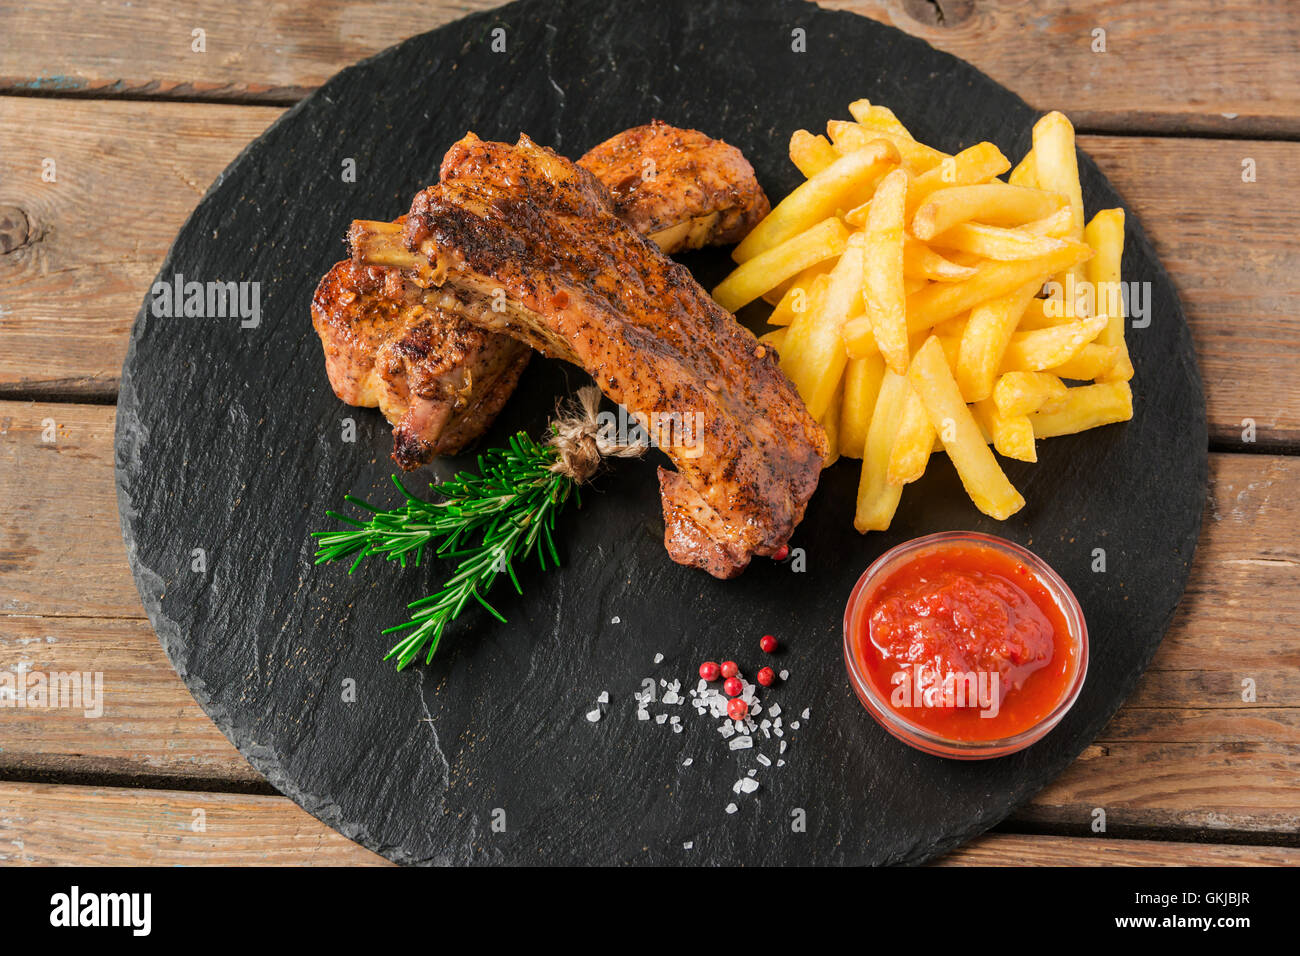 baked pork ribs with french fries and red sauce Stock Photo